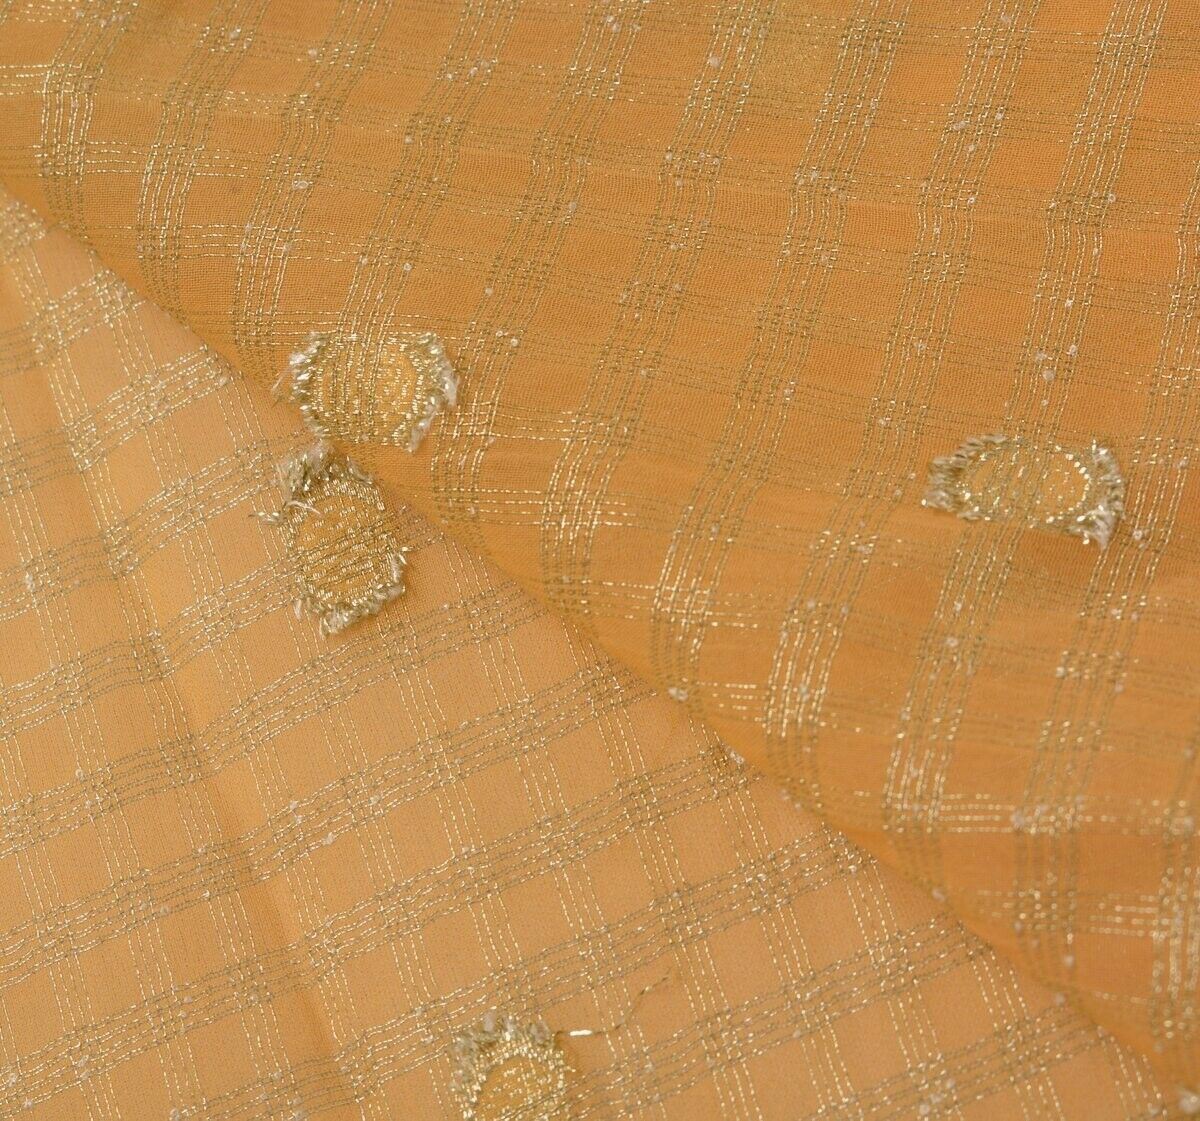 Indian Art Silk Woven Peach Vintage Sari Remnant Scrap Fabric for Sewing Craft